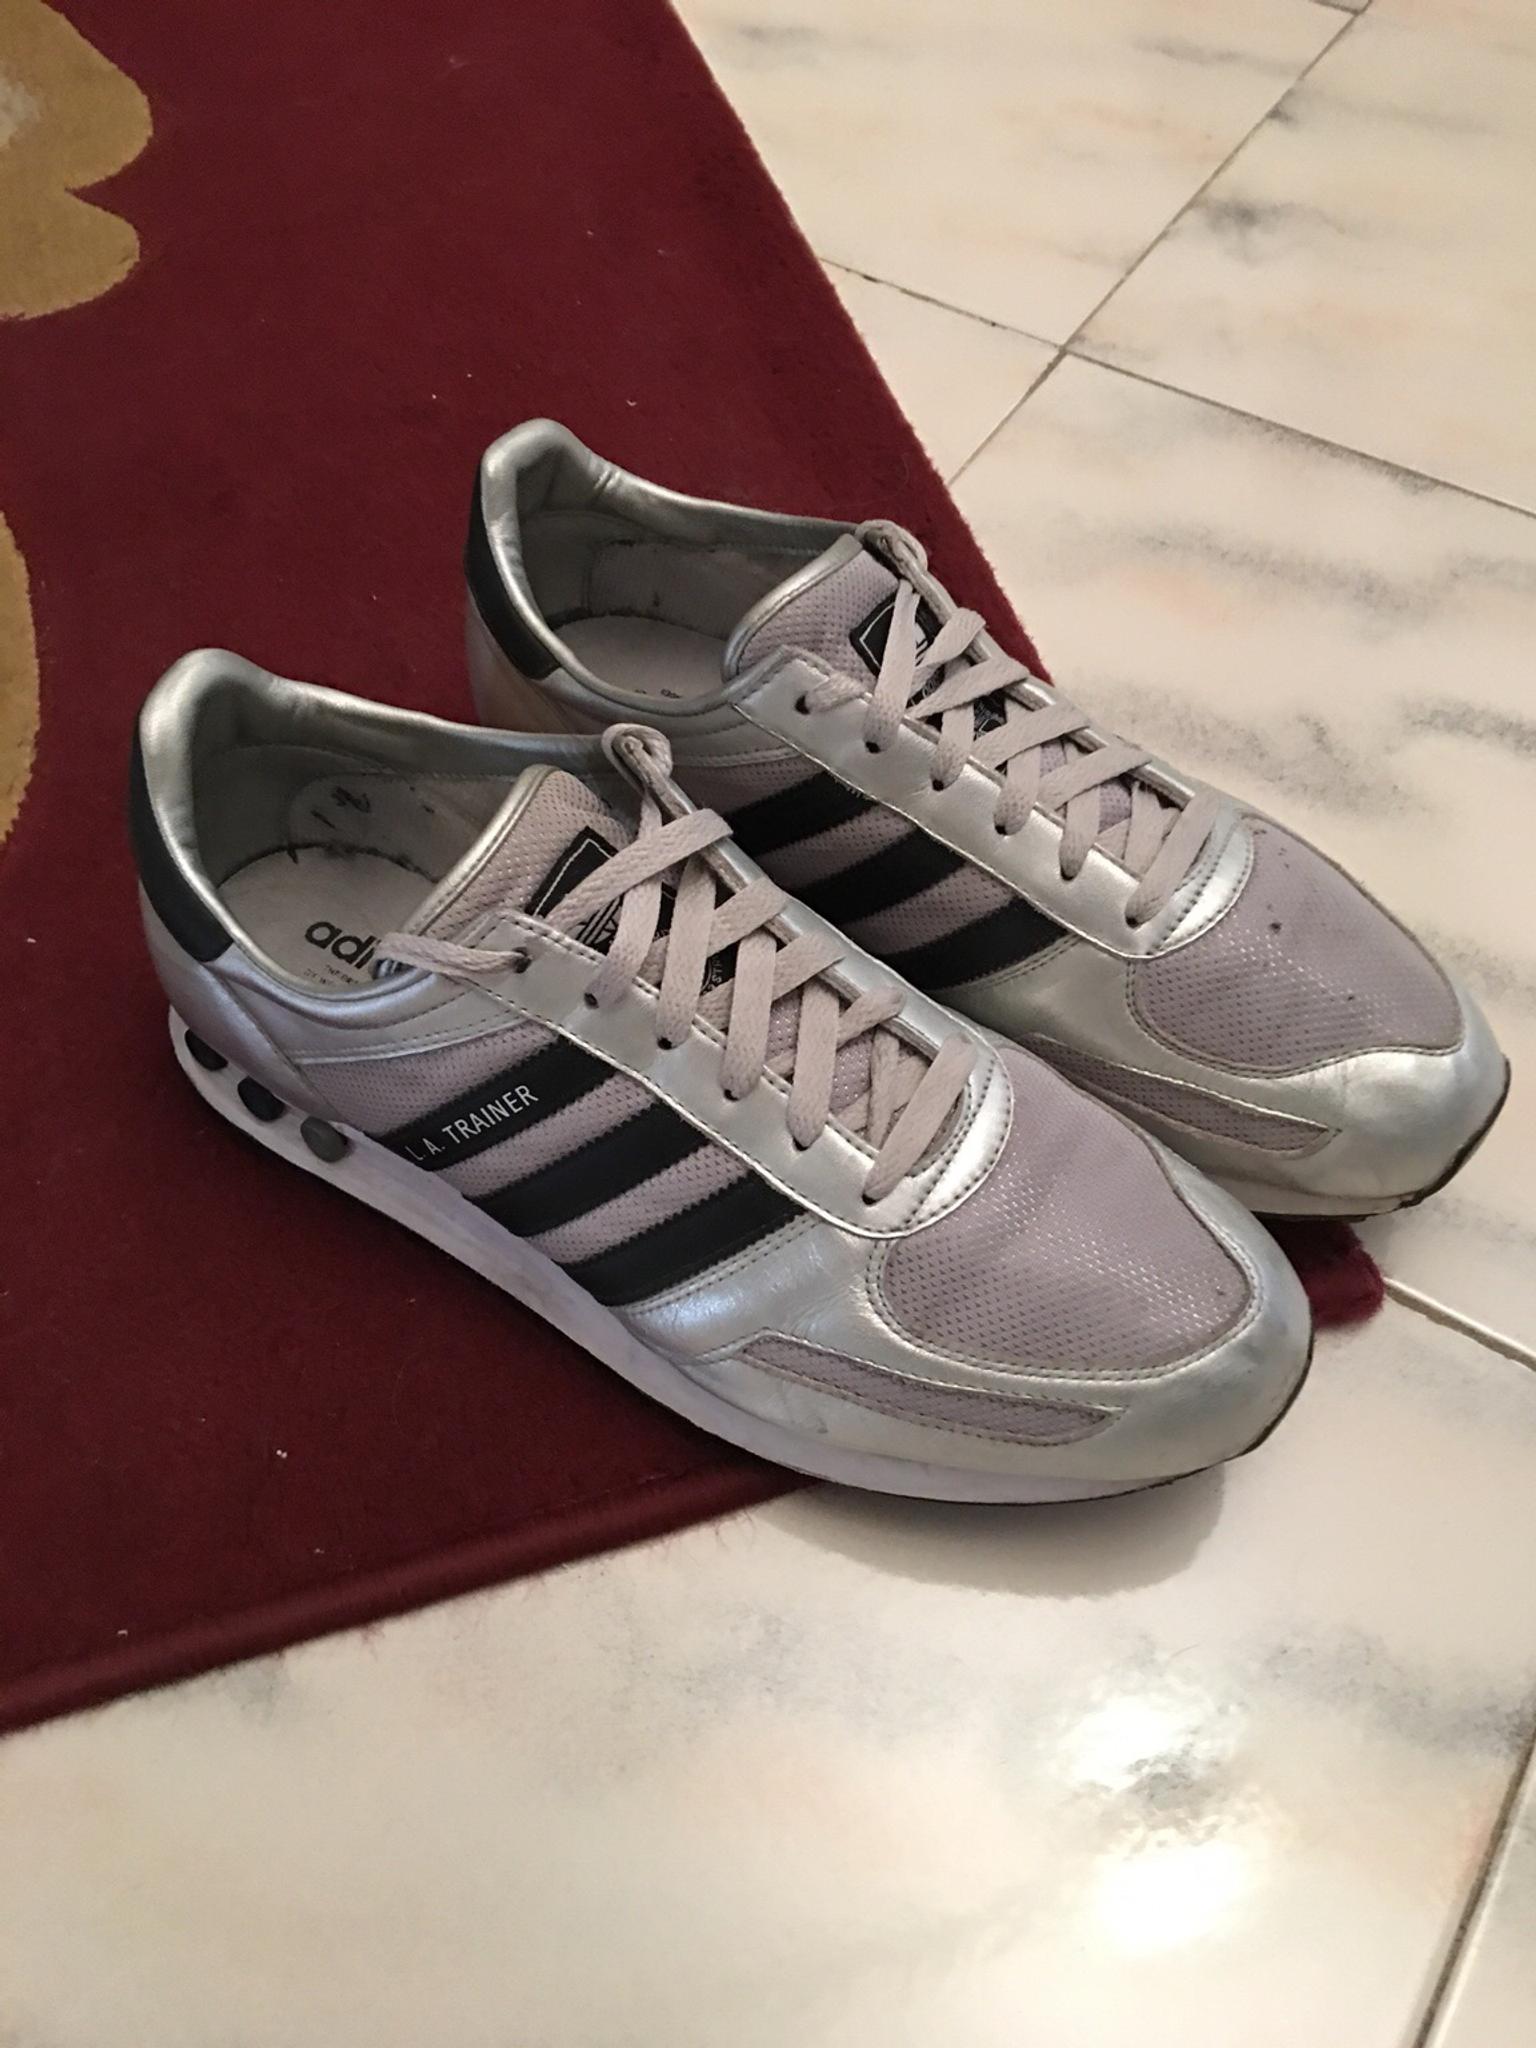 ADIDAS LOS ANGELES TRAINER n.43 in 00182 Roma for €30.00 for sale | Shpock